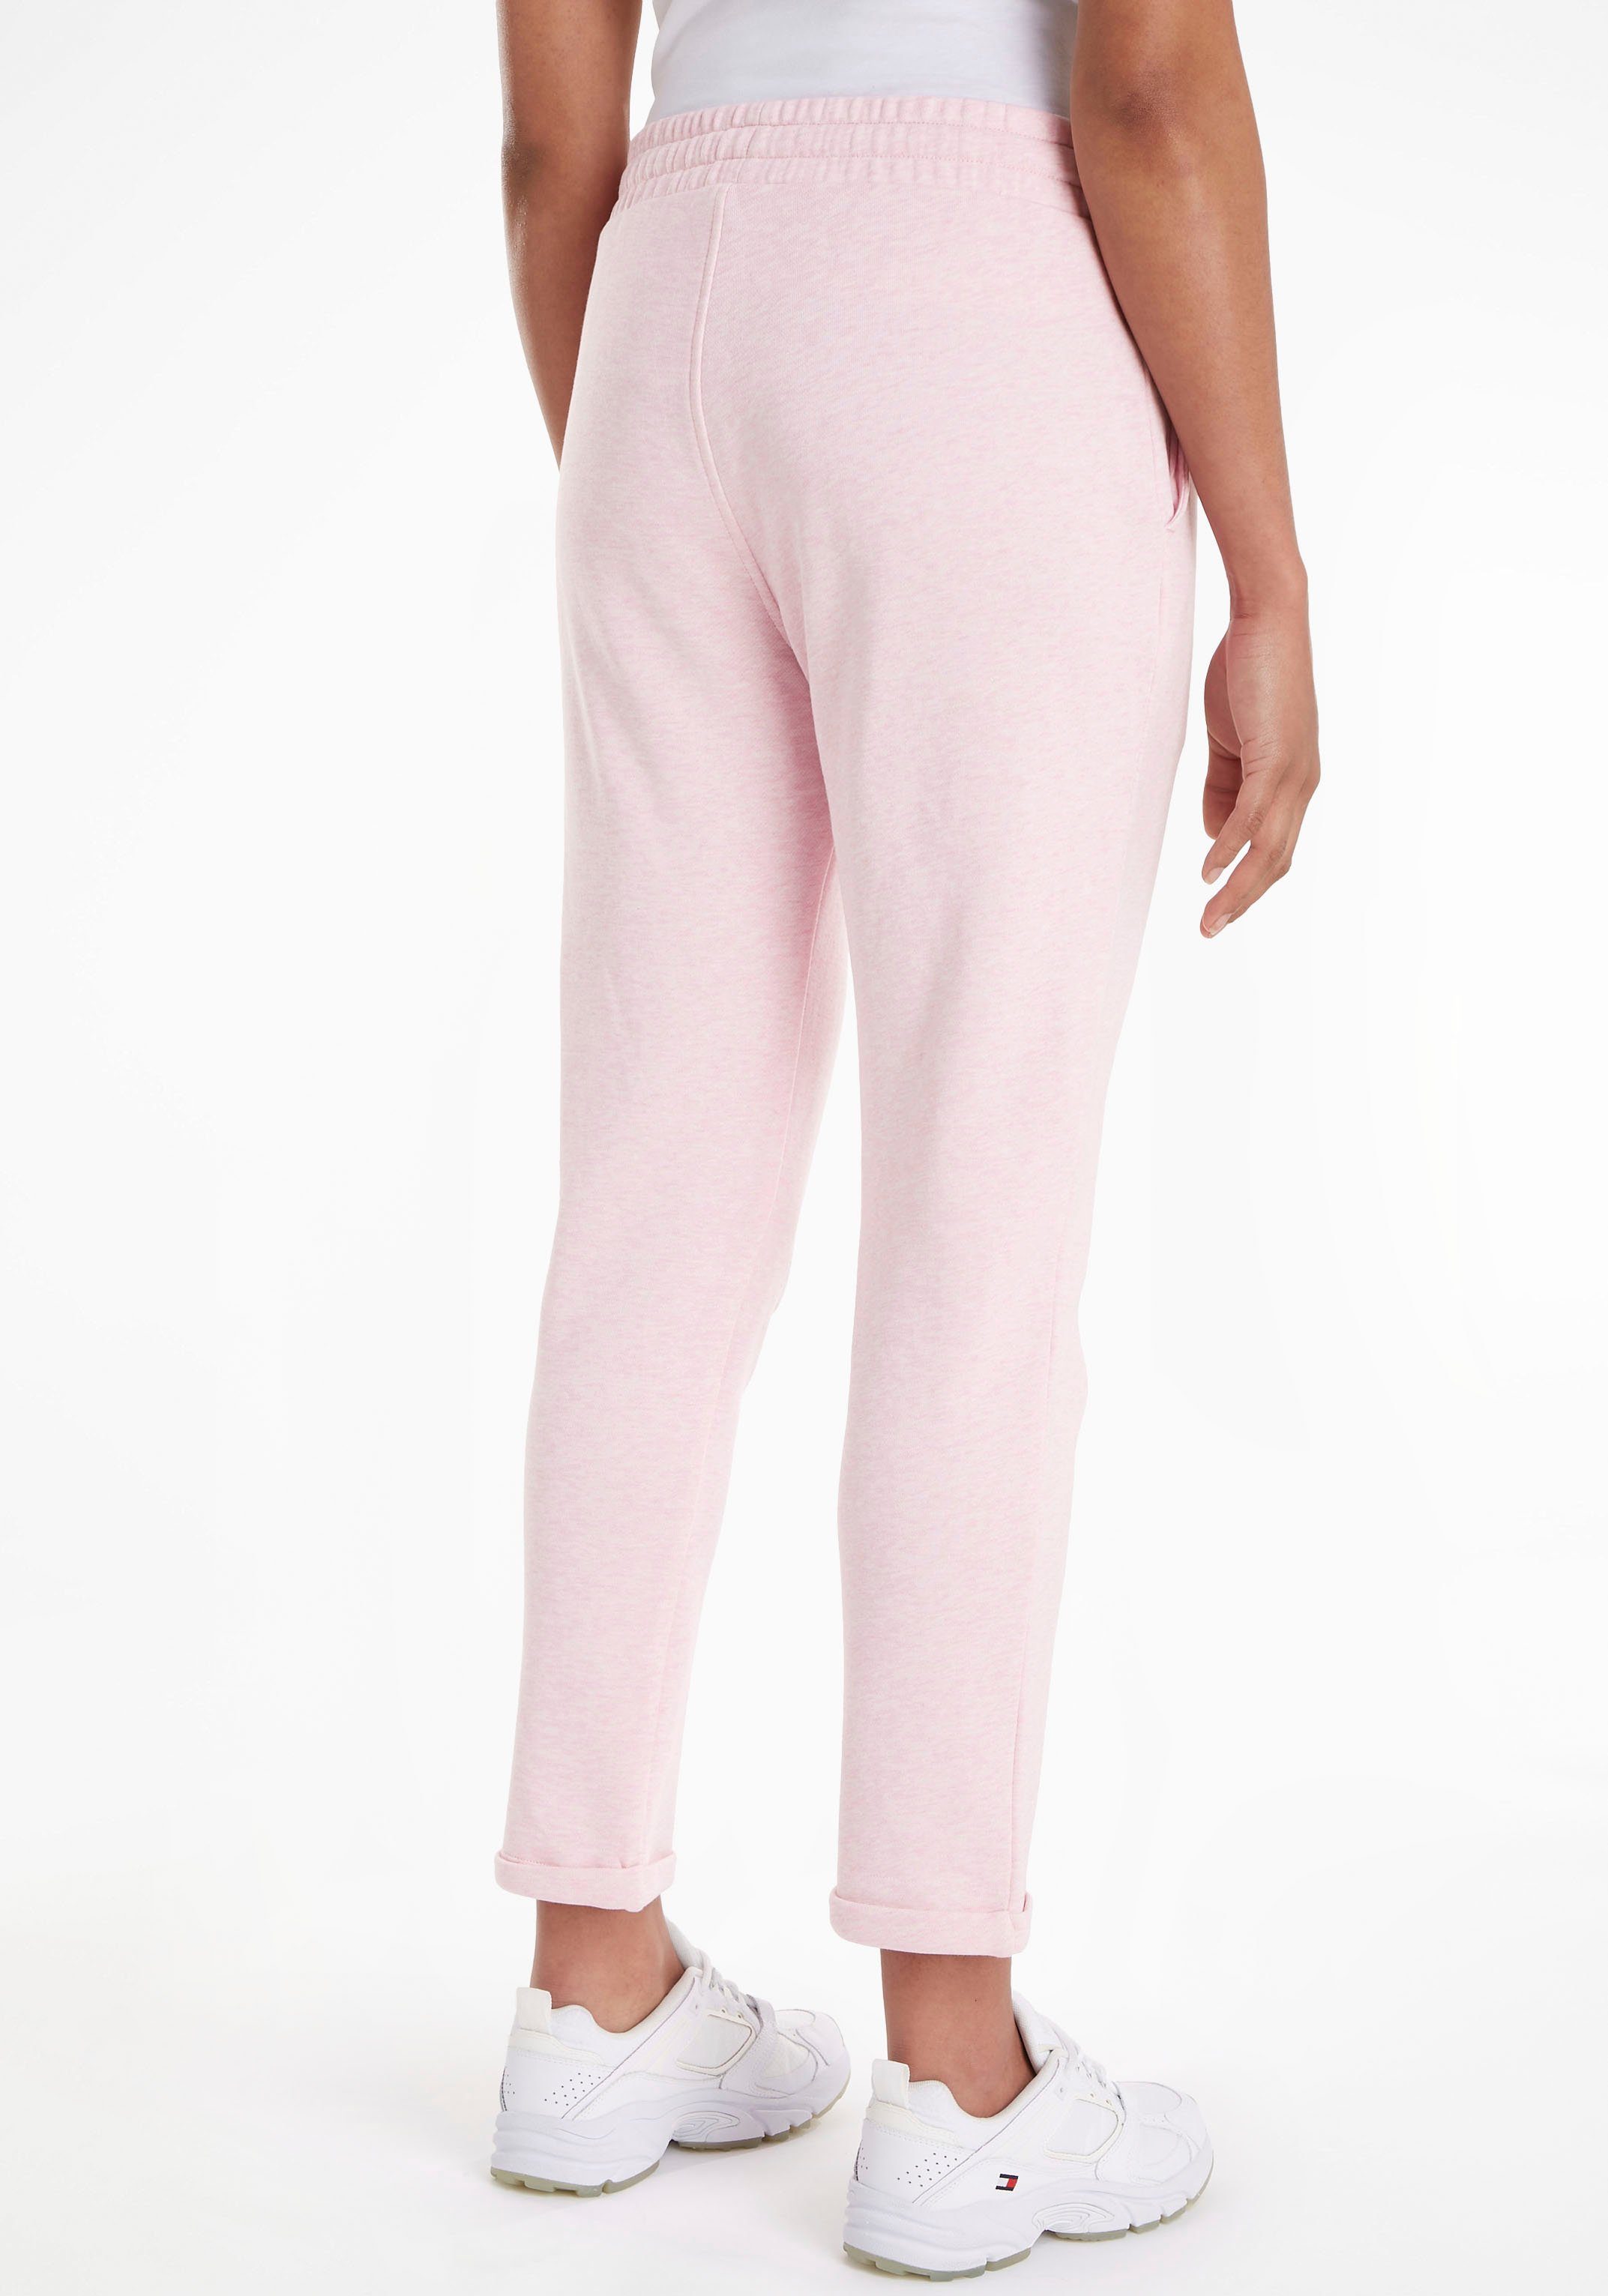 Hilfiger SWEATPANTS Hilfiger Markenlabel Classic-Pink-Heather NYC mit Sweatpants Tommy Tommy ROUNDALL TAPERED